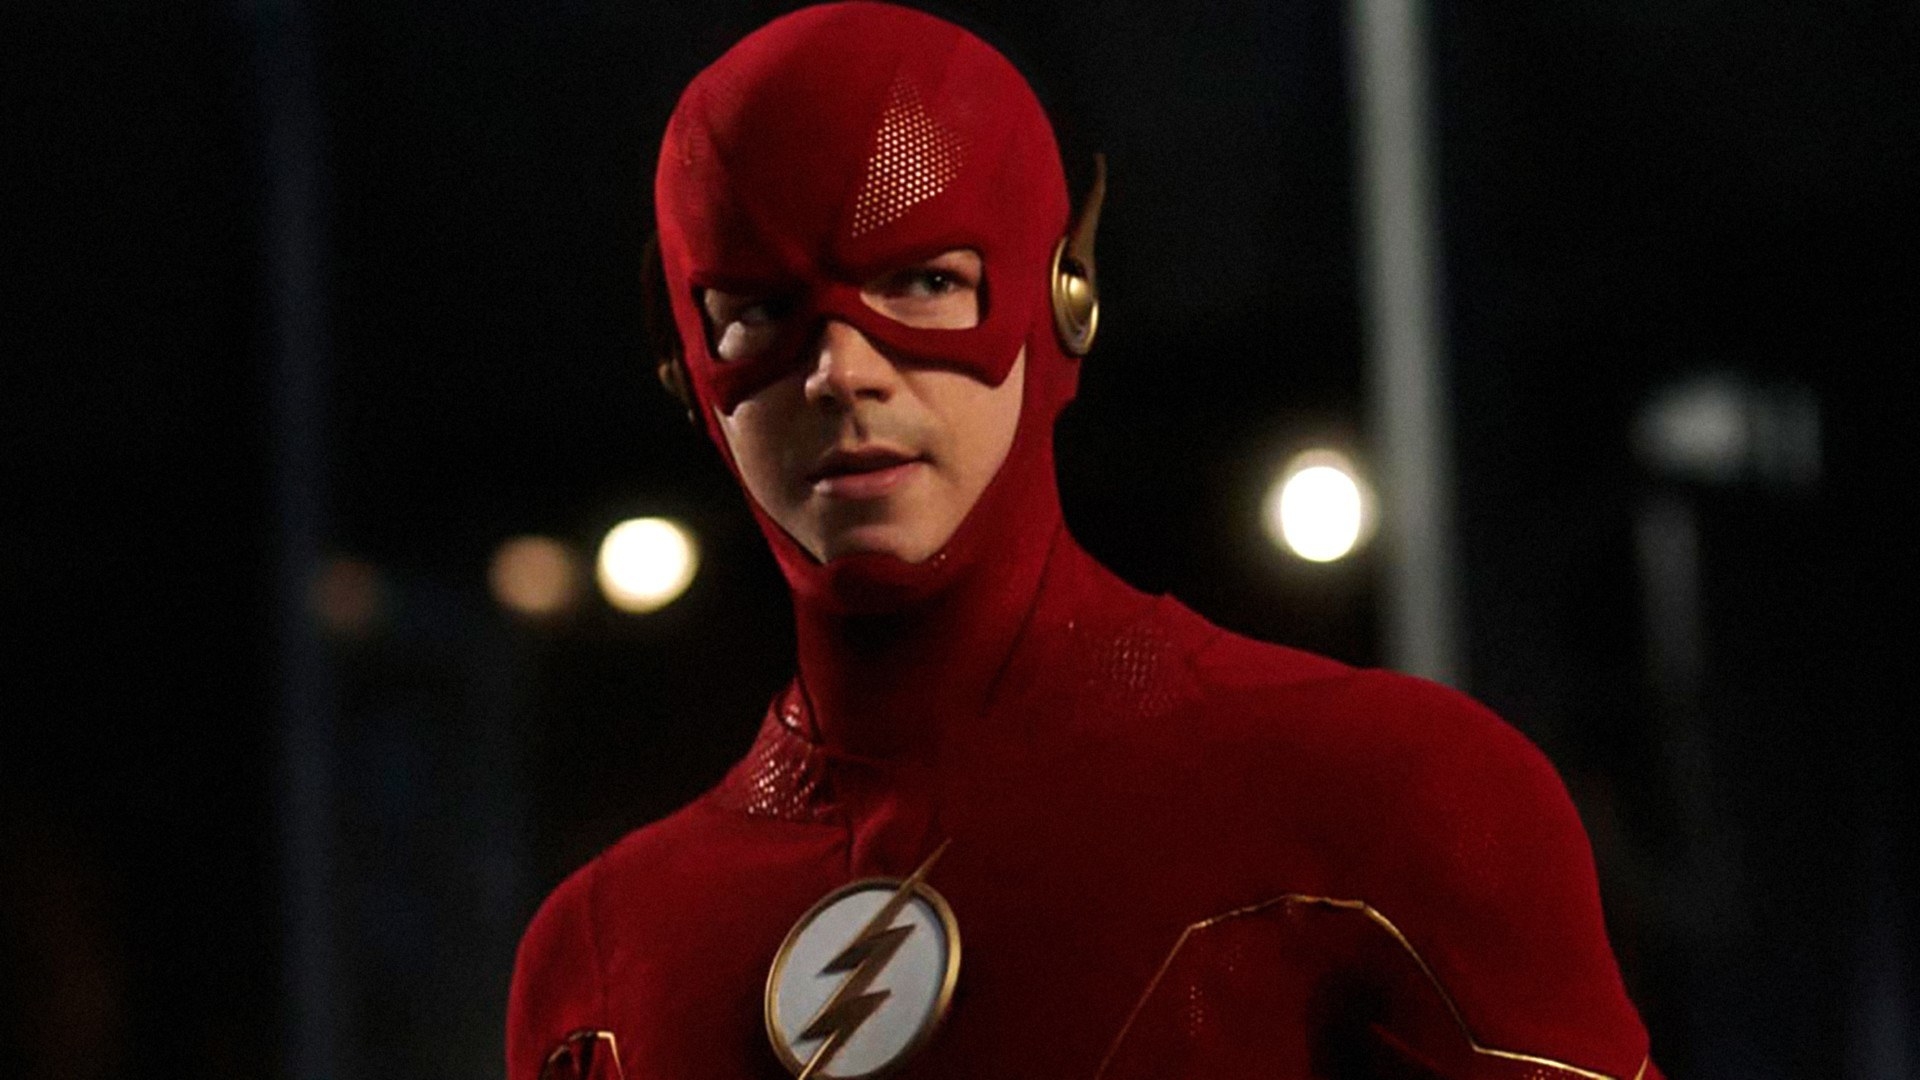 The Flash standing in his costume